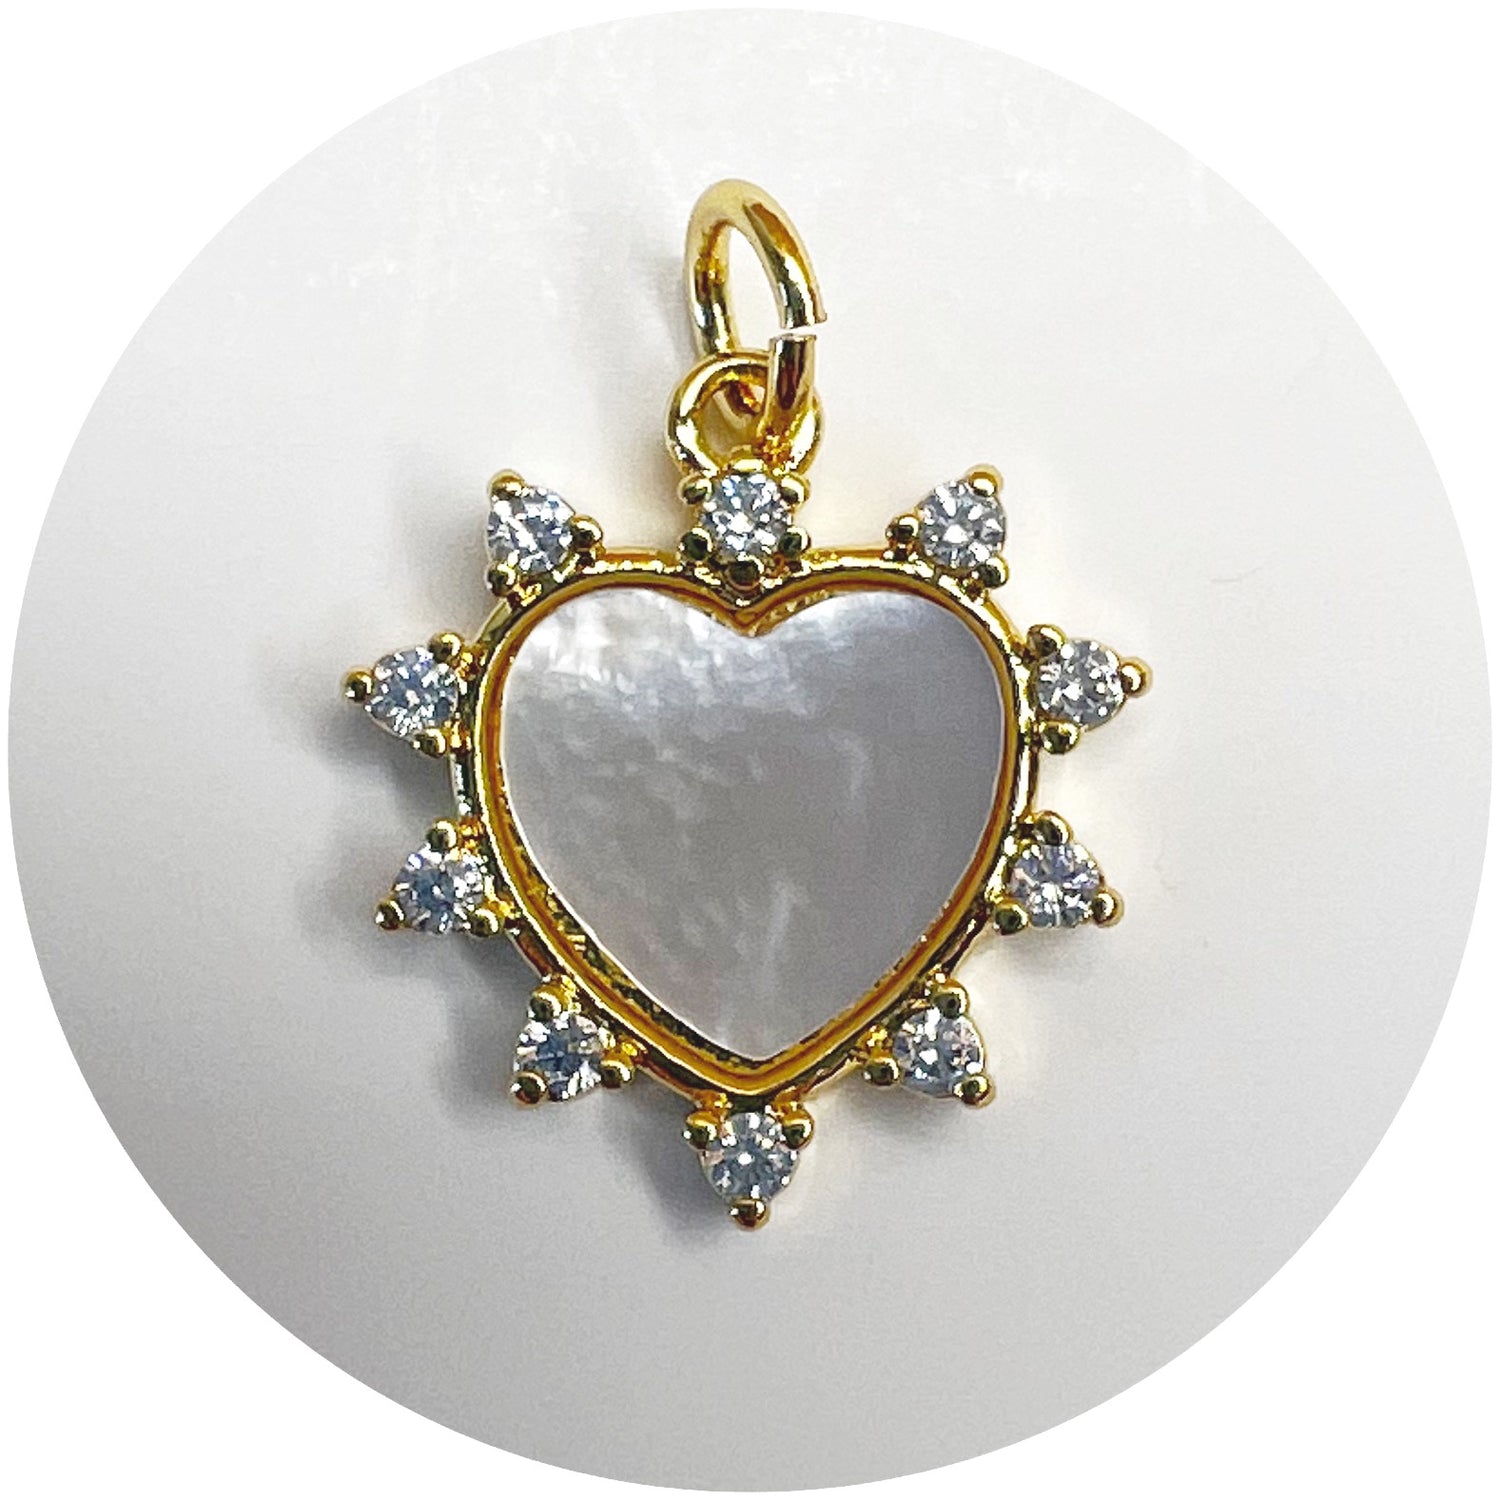 Mother of Pearl Heart Pendant